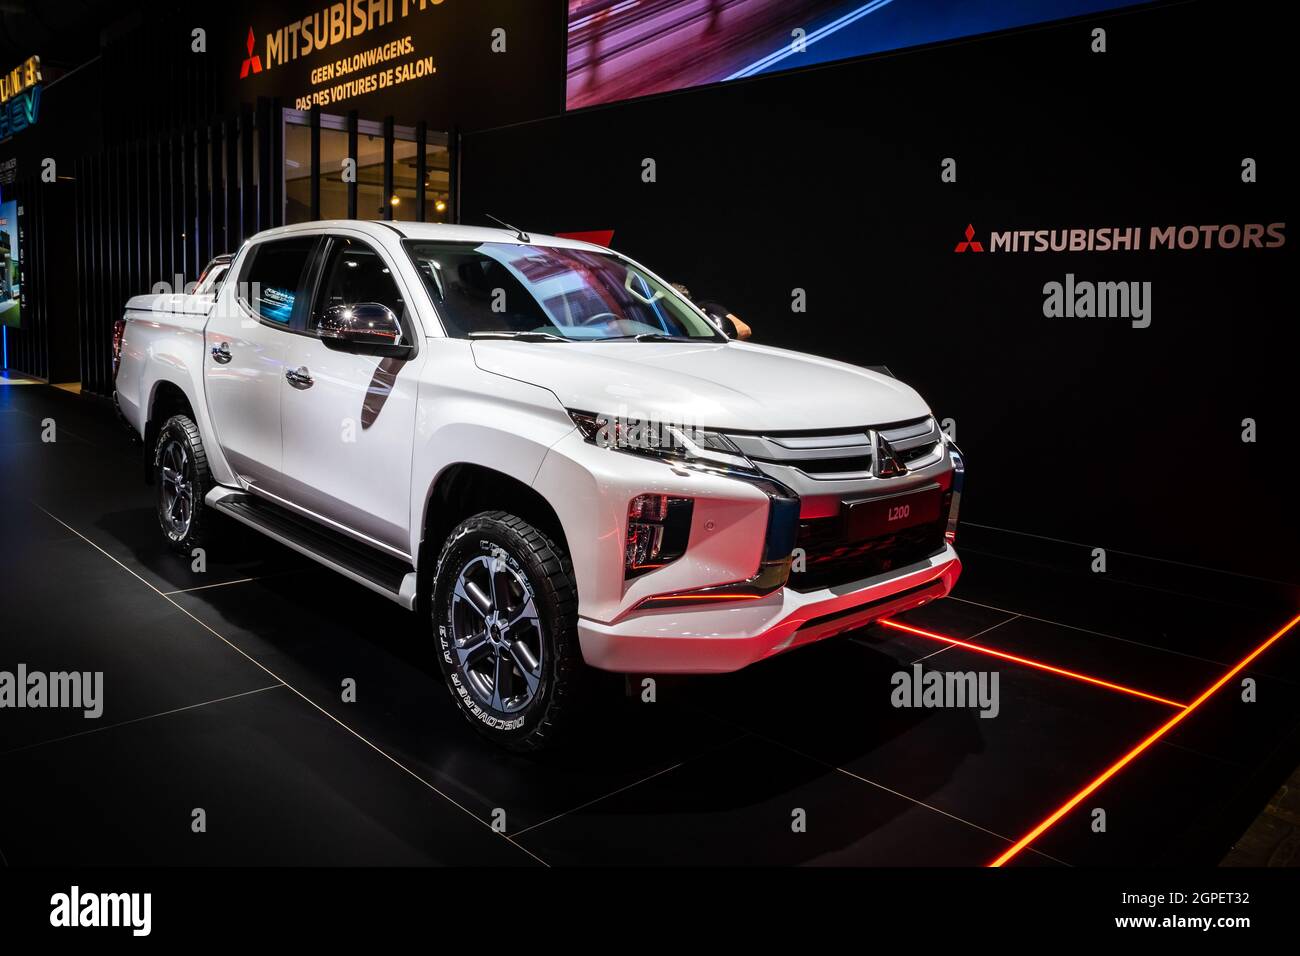 Mitsubishi L200 pick-up truck model shown at the Autosalon 2020 Motor Show. Brussels, Belgium - January 9, 2020. Stock Photo